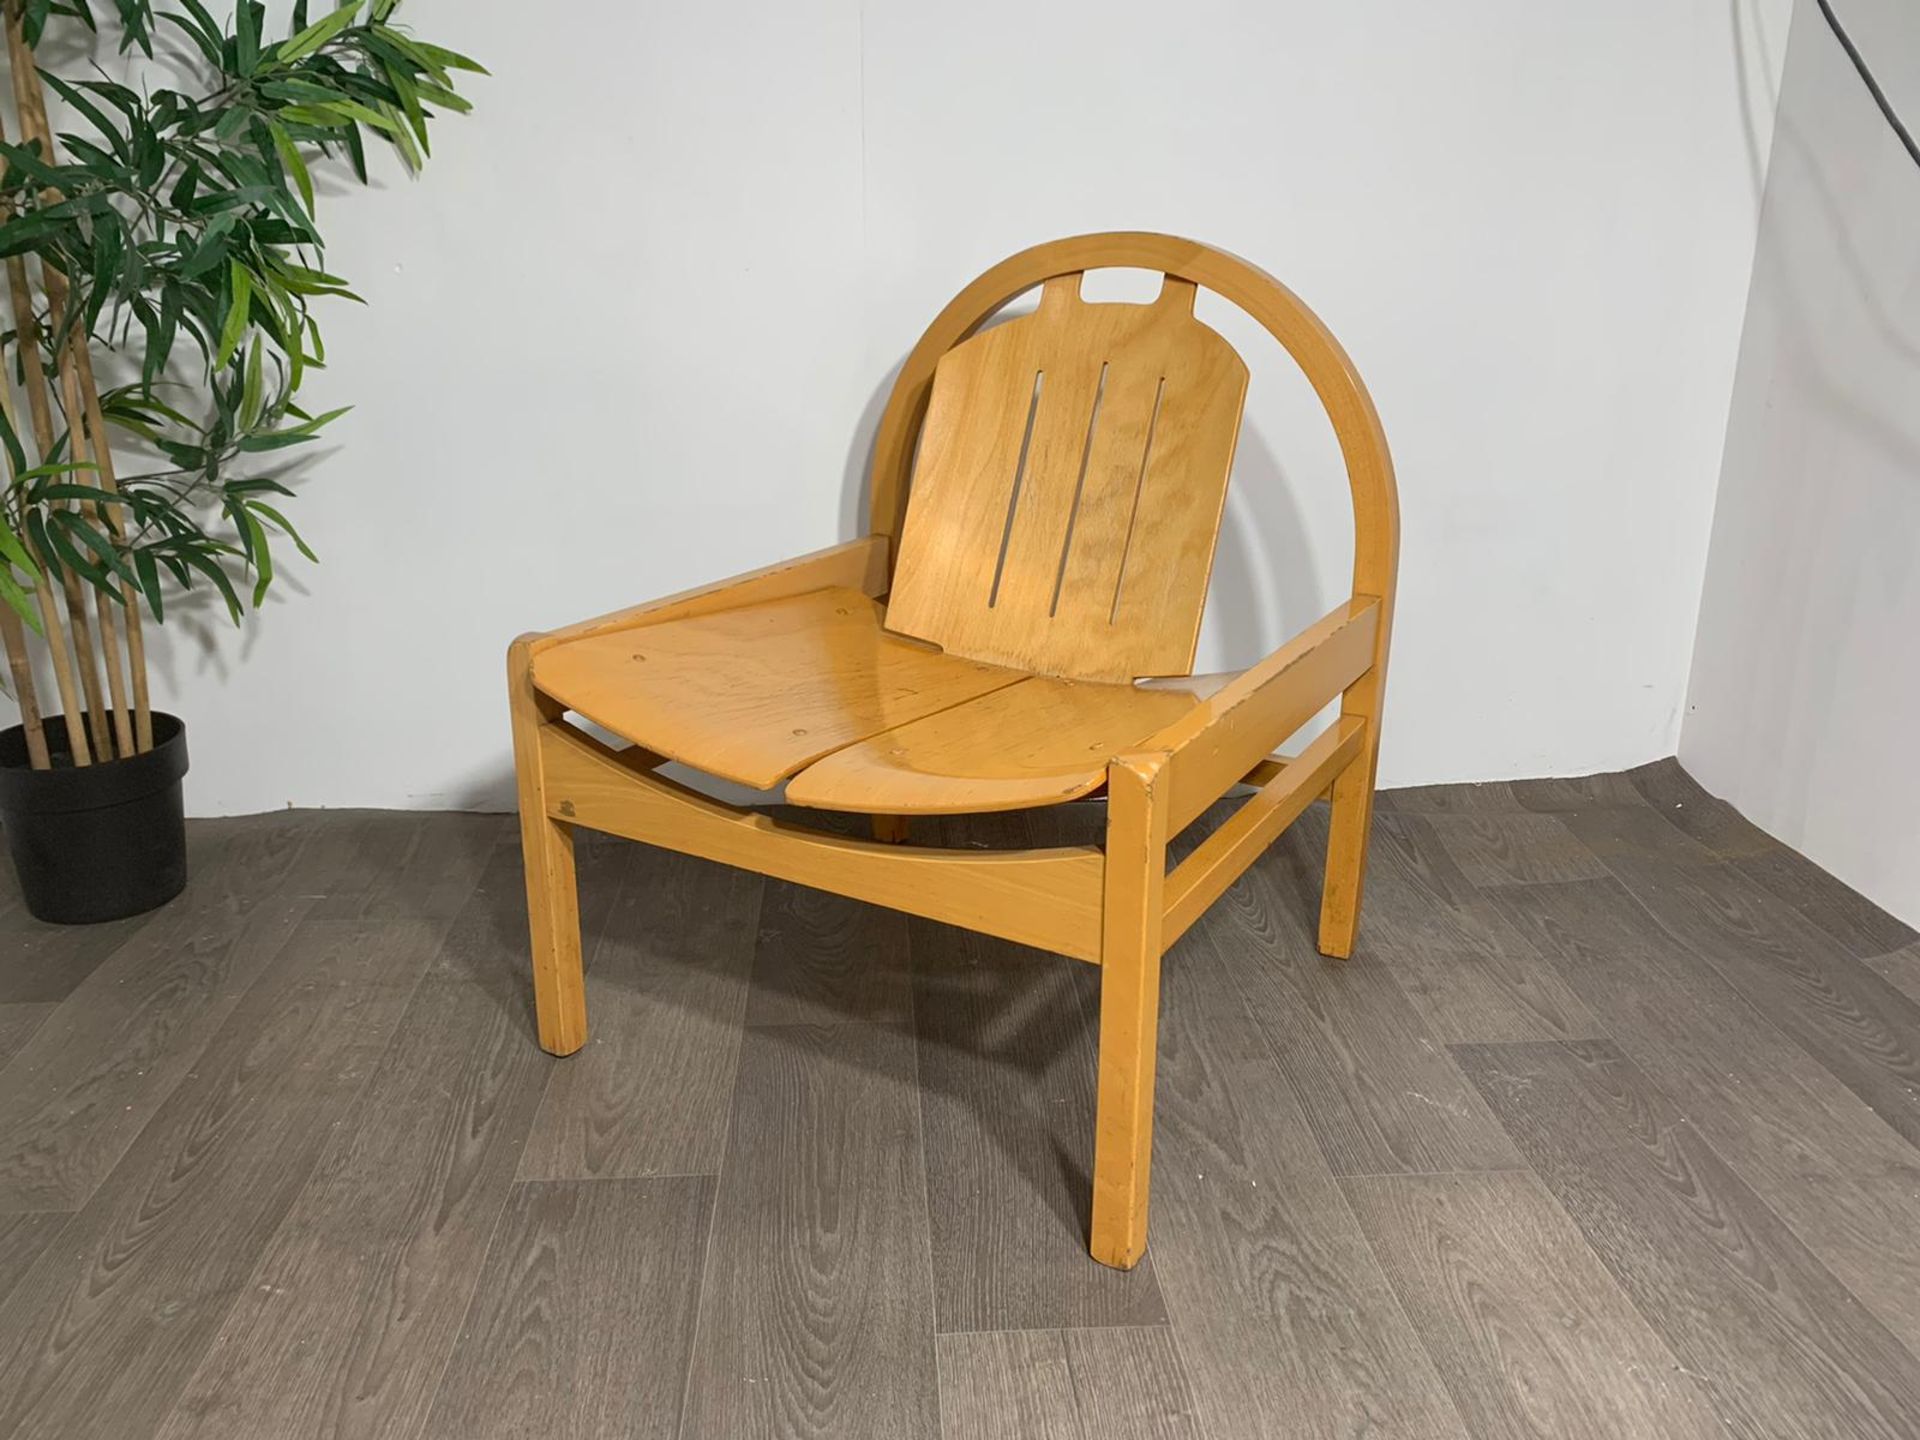 Wood Feature Chair - Image 6 of 6